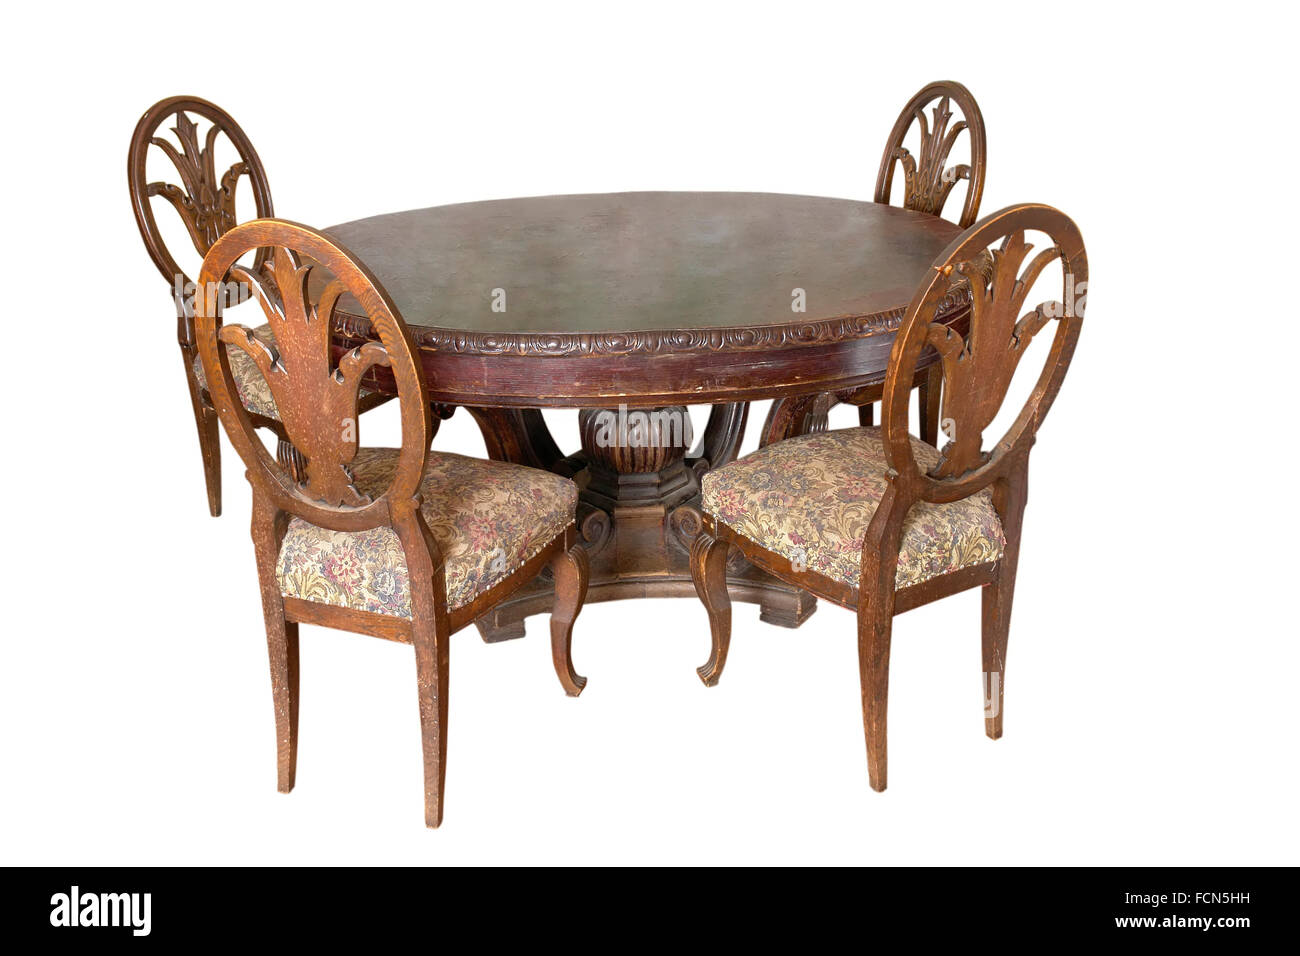 Table with chairs of 18th century. Part of big suite of furniture (sideboard, chest of drawers. table). Germany. Dresden Stock Photo